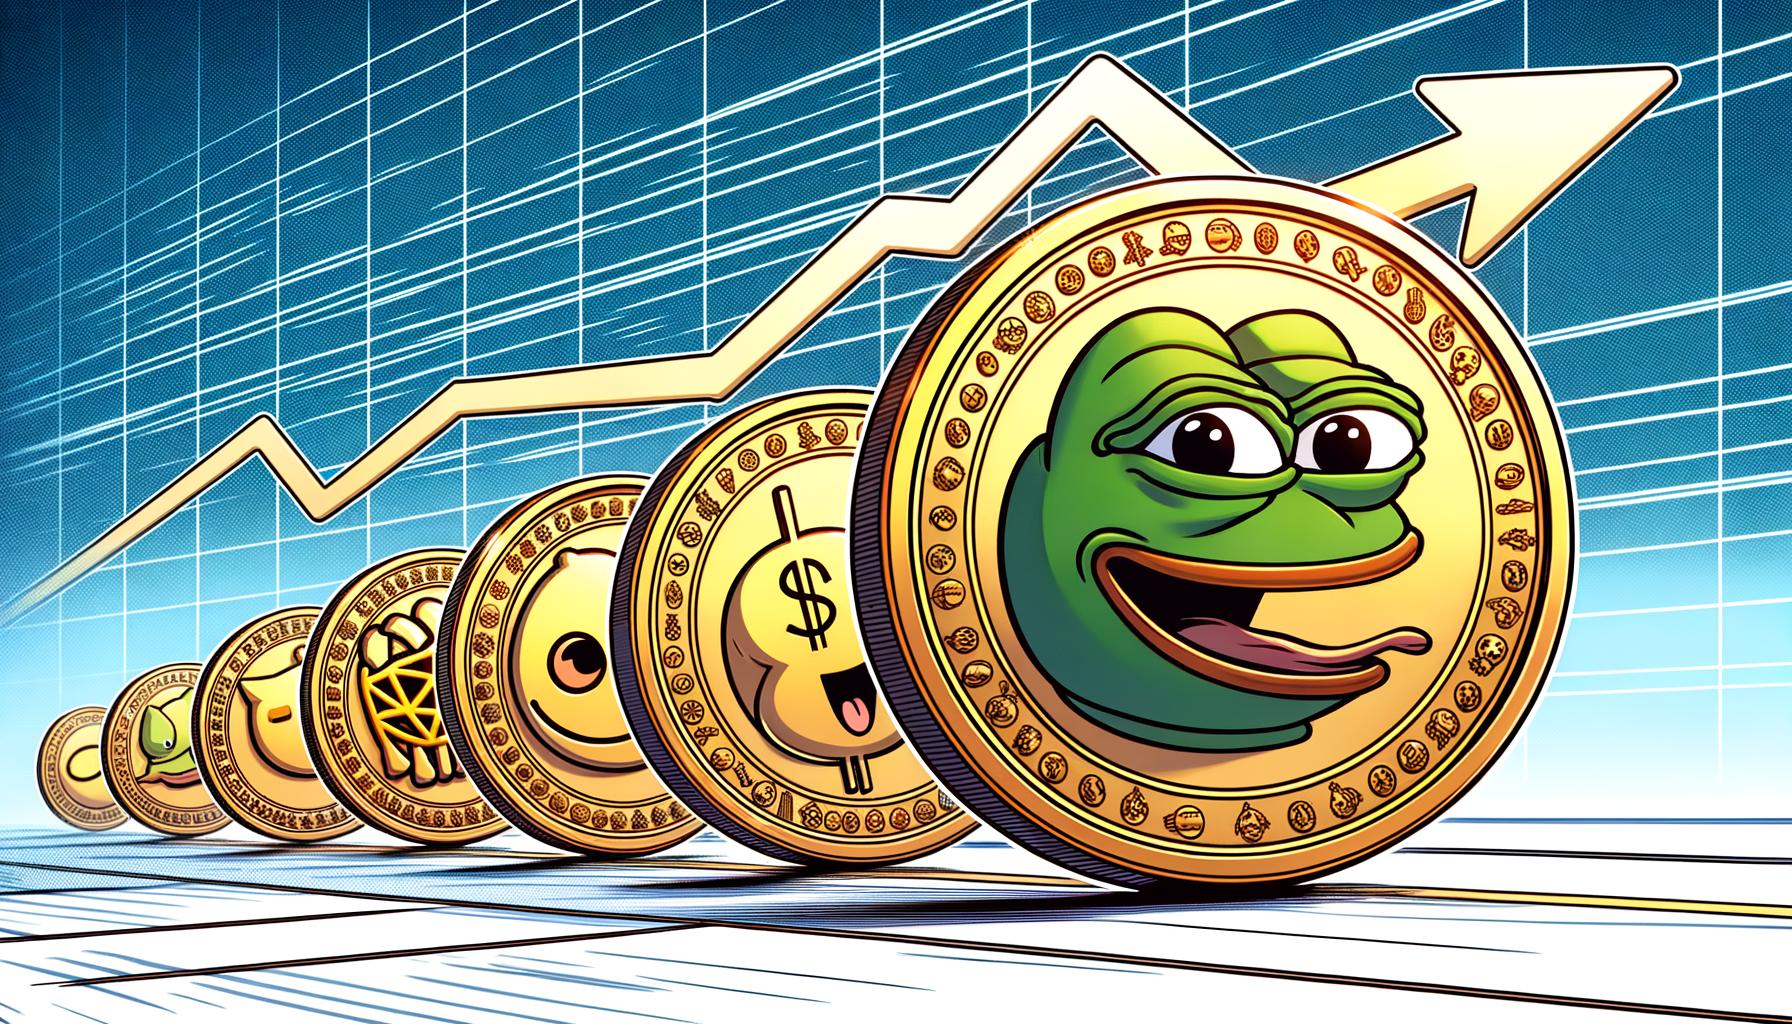 PEPE Leads the Pack: Outpacing Other MEME Coins In Market Surge